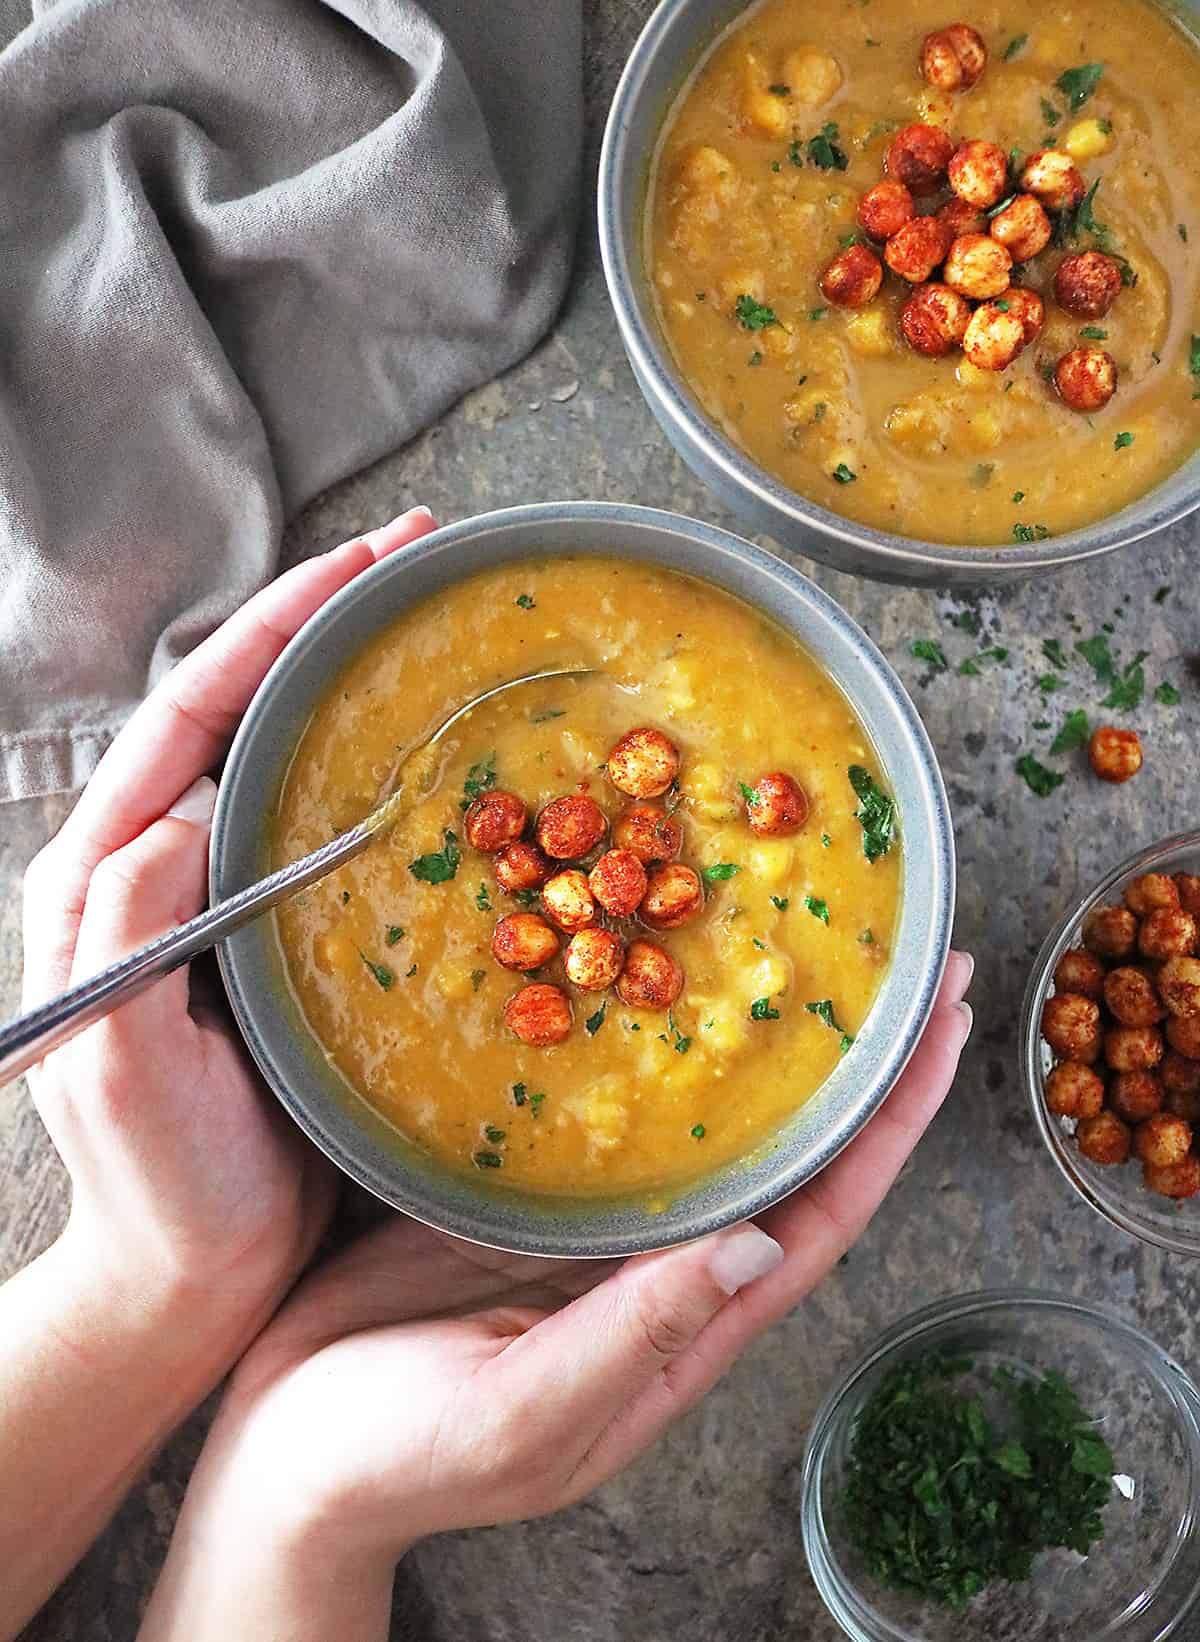 Warm up this winter with a healthy bowl of Garlic Pumpkin Soup.